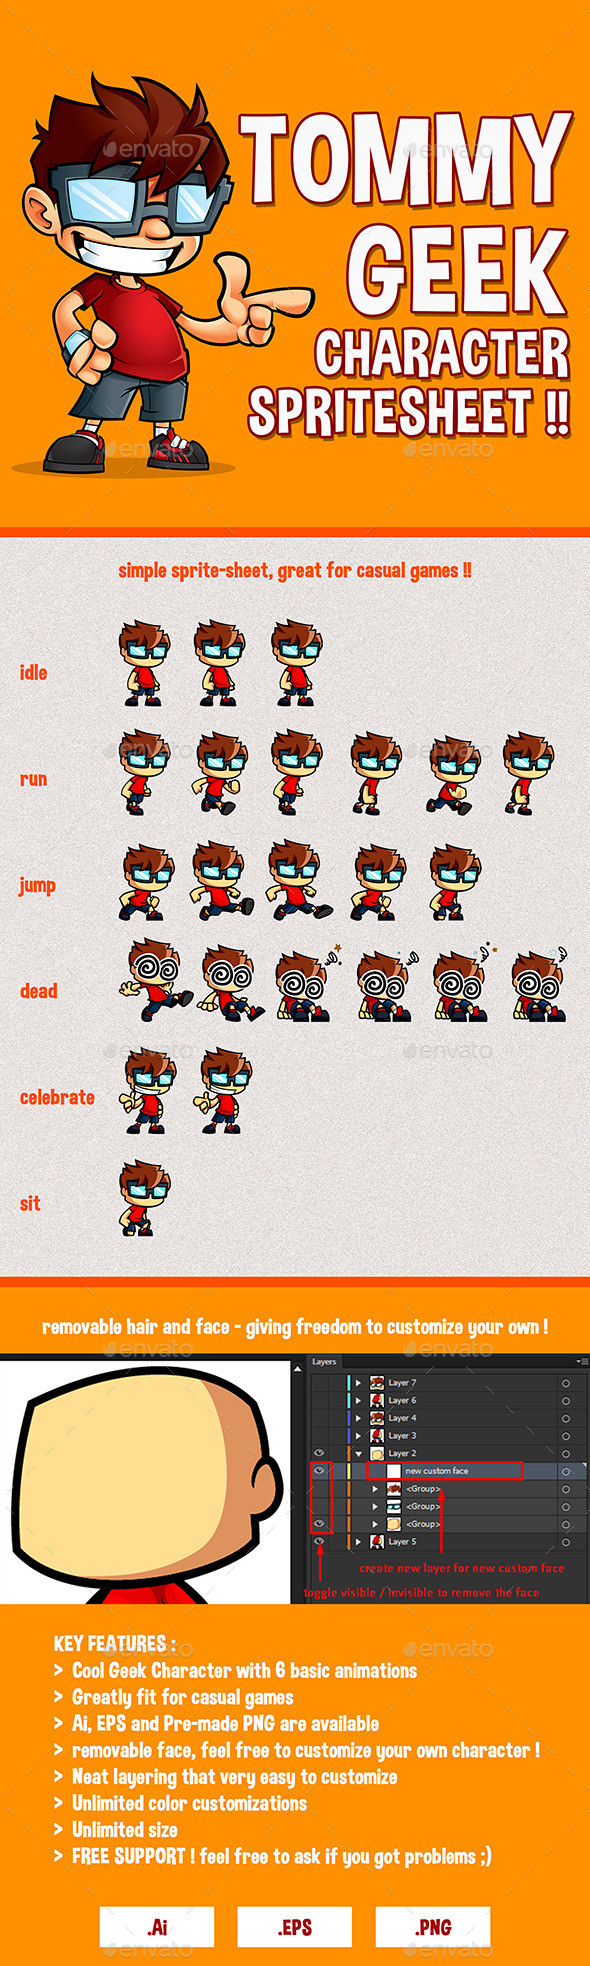 Tommy geek game character sprites cover